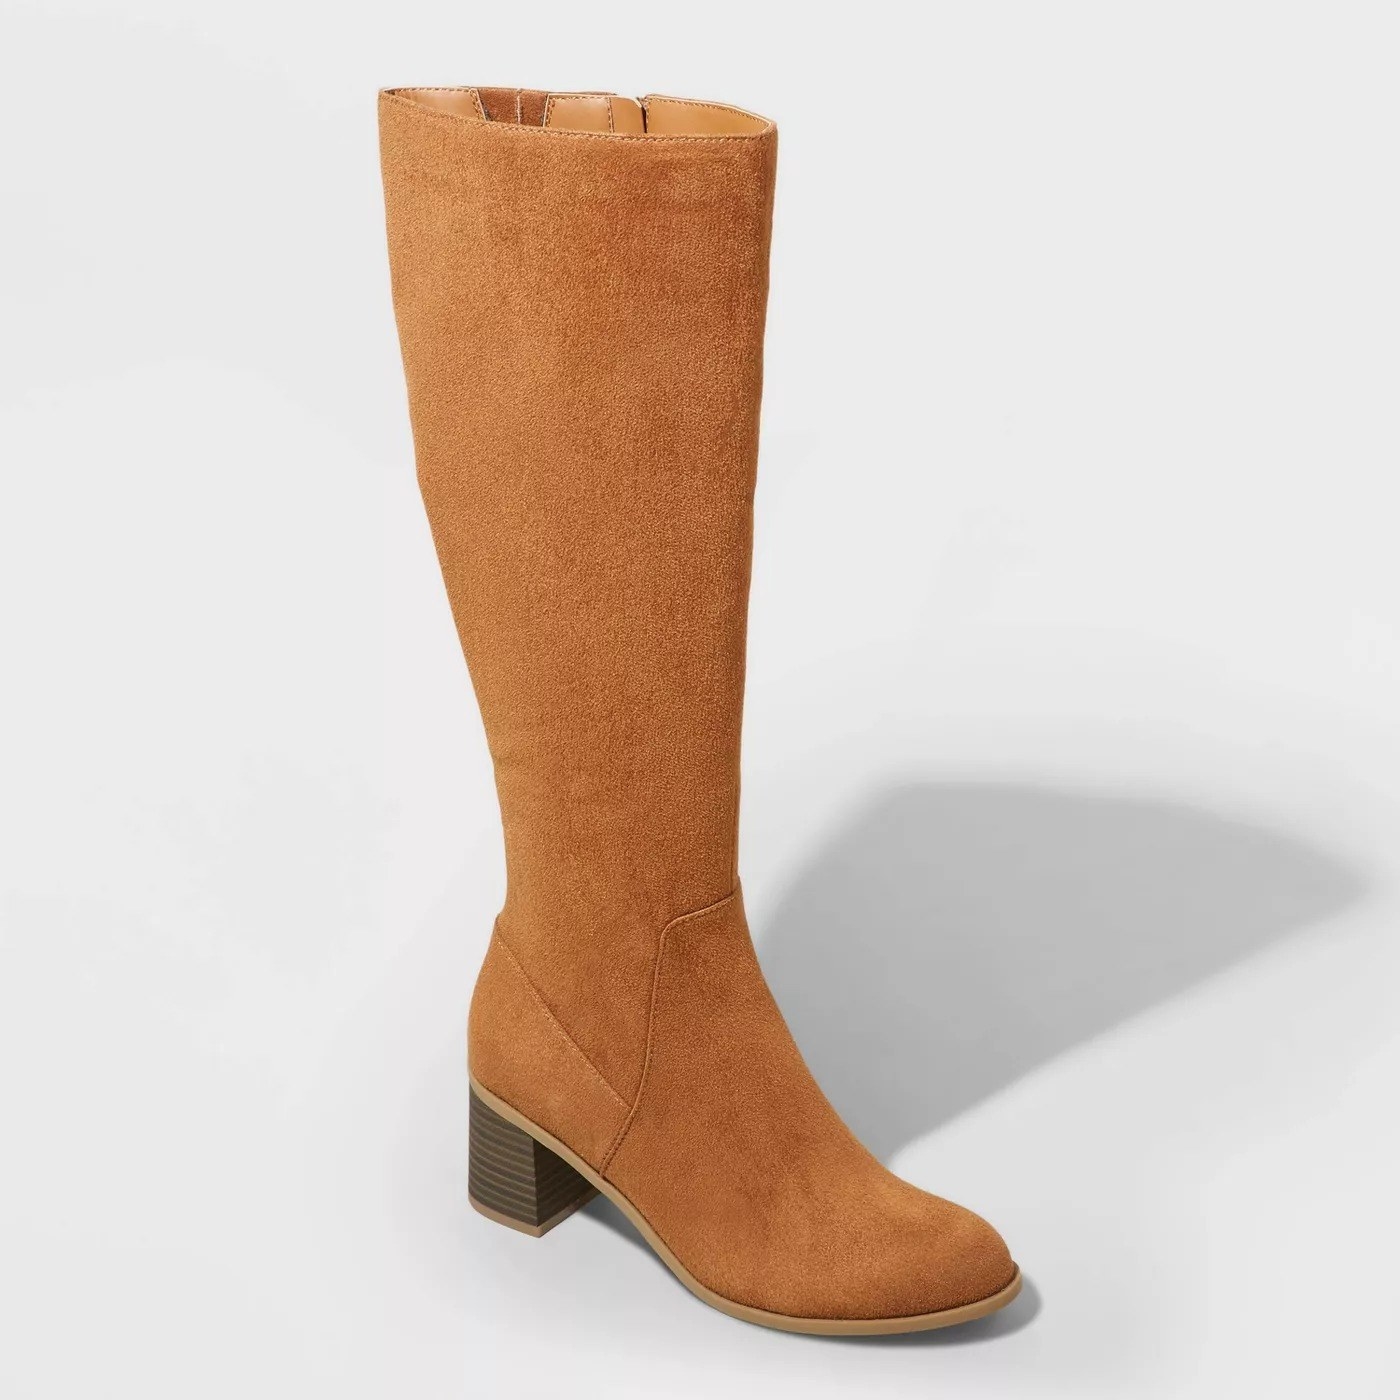 The camel colored boot with brown keel